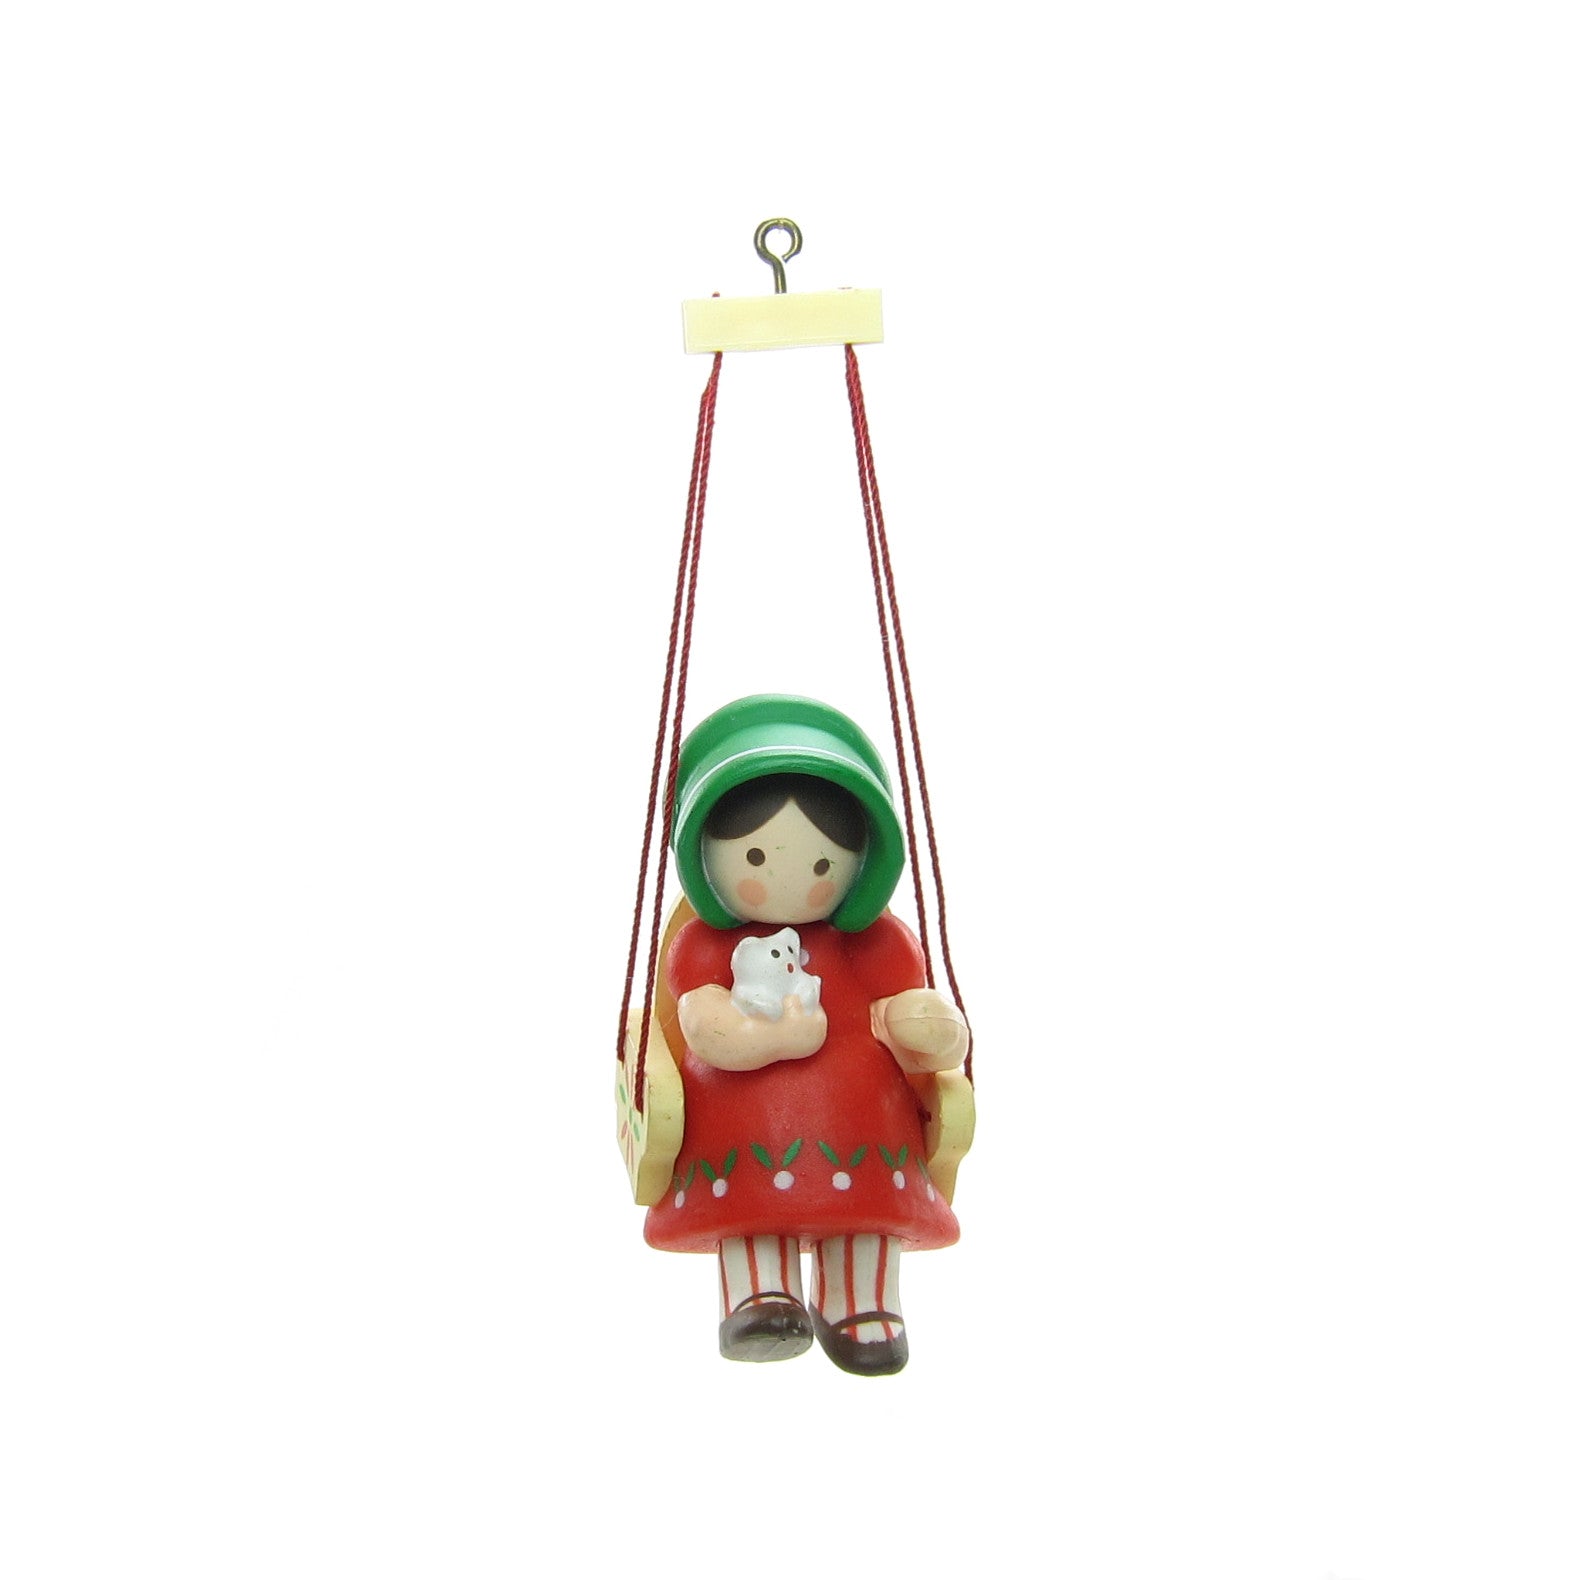 Christmas is for Children Hallmark ornament with girl in swing